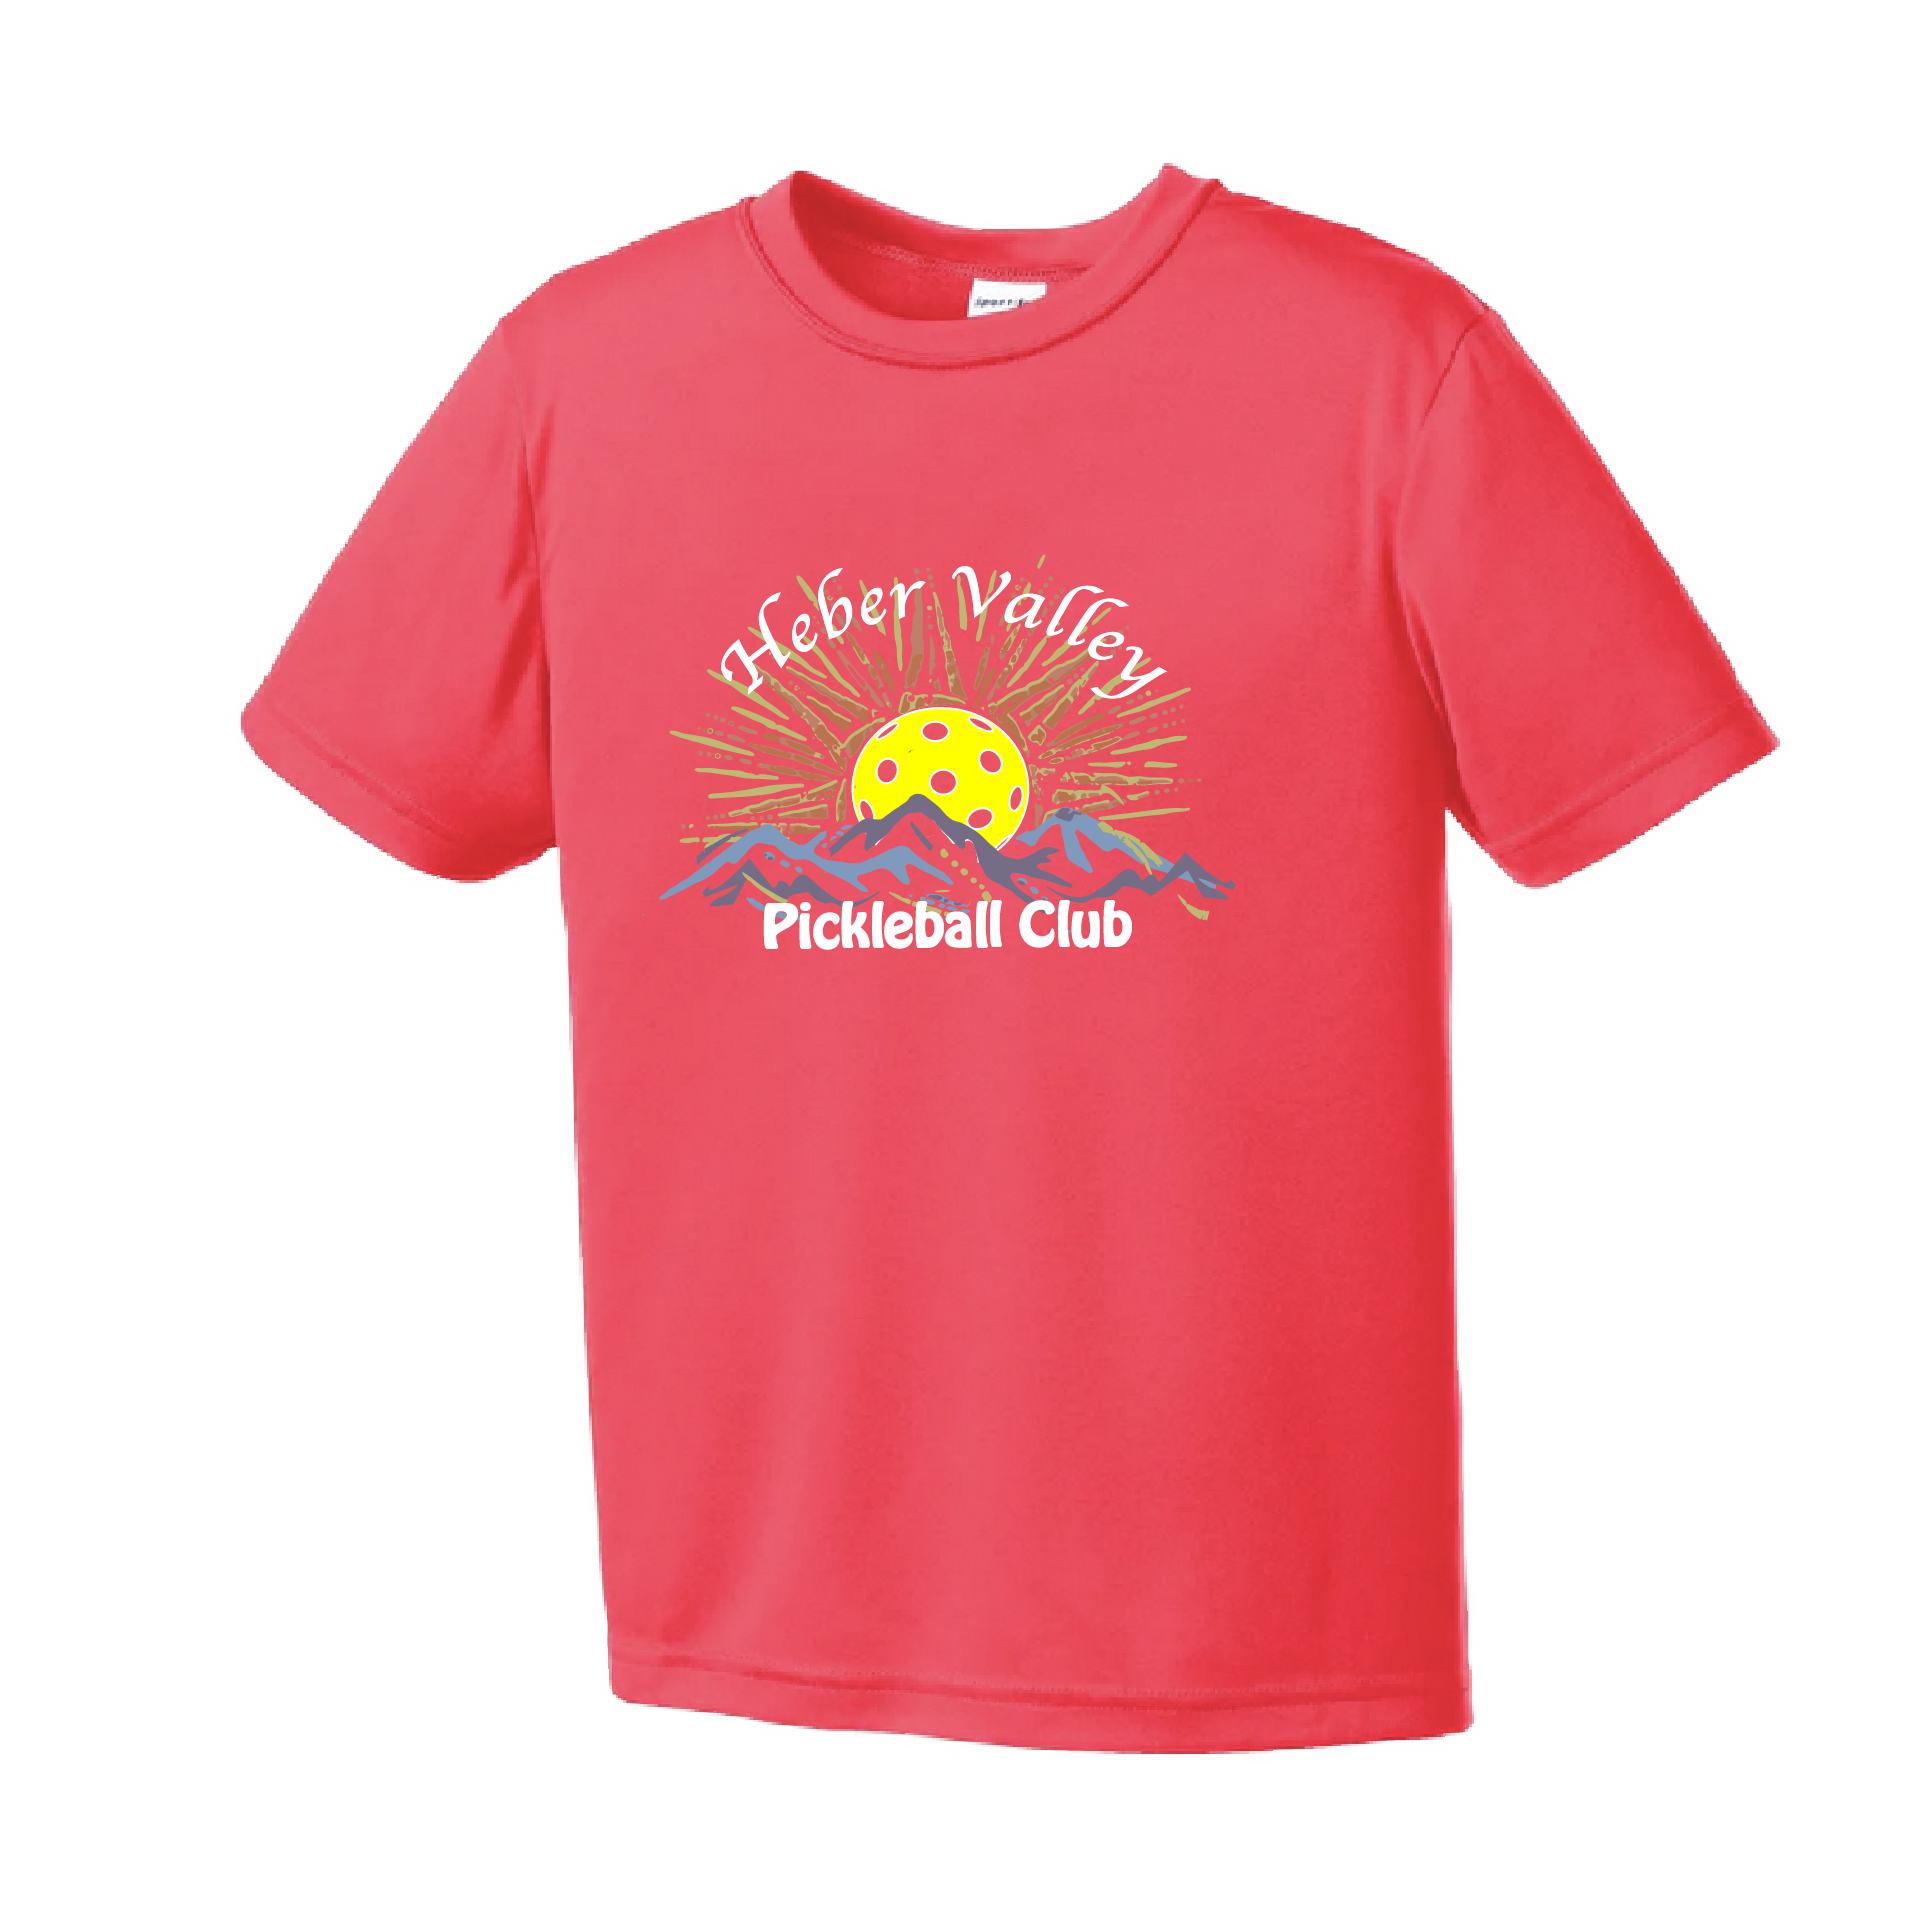 Pickleball Shirt Design: Heber Valley Pickleball Club (Full Design)  Youth Style: Short Sleeve  Shirts are lightweight, roomy and highly breathable. These moisture-wicking shirts are designed for athletic performance. They feature PosiCharge technology to lock in color and prevent logos from fading. Removable tag and set-in sleeves for comfort.